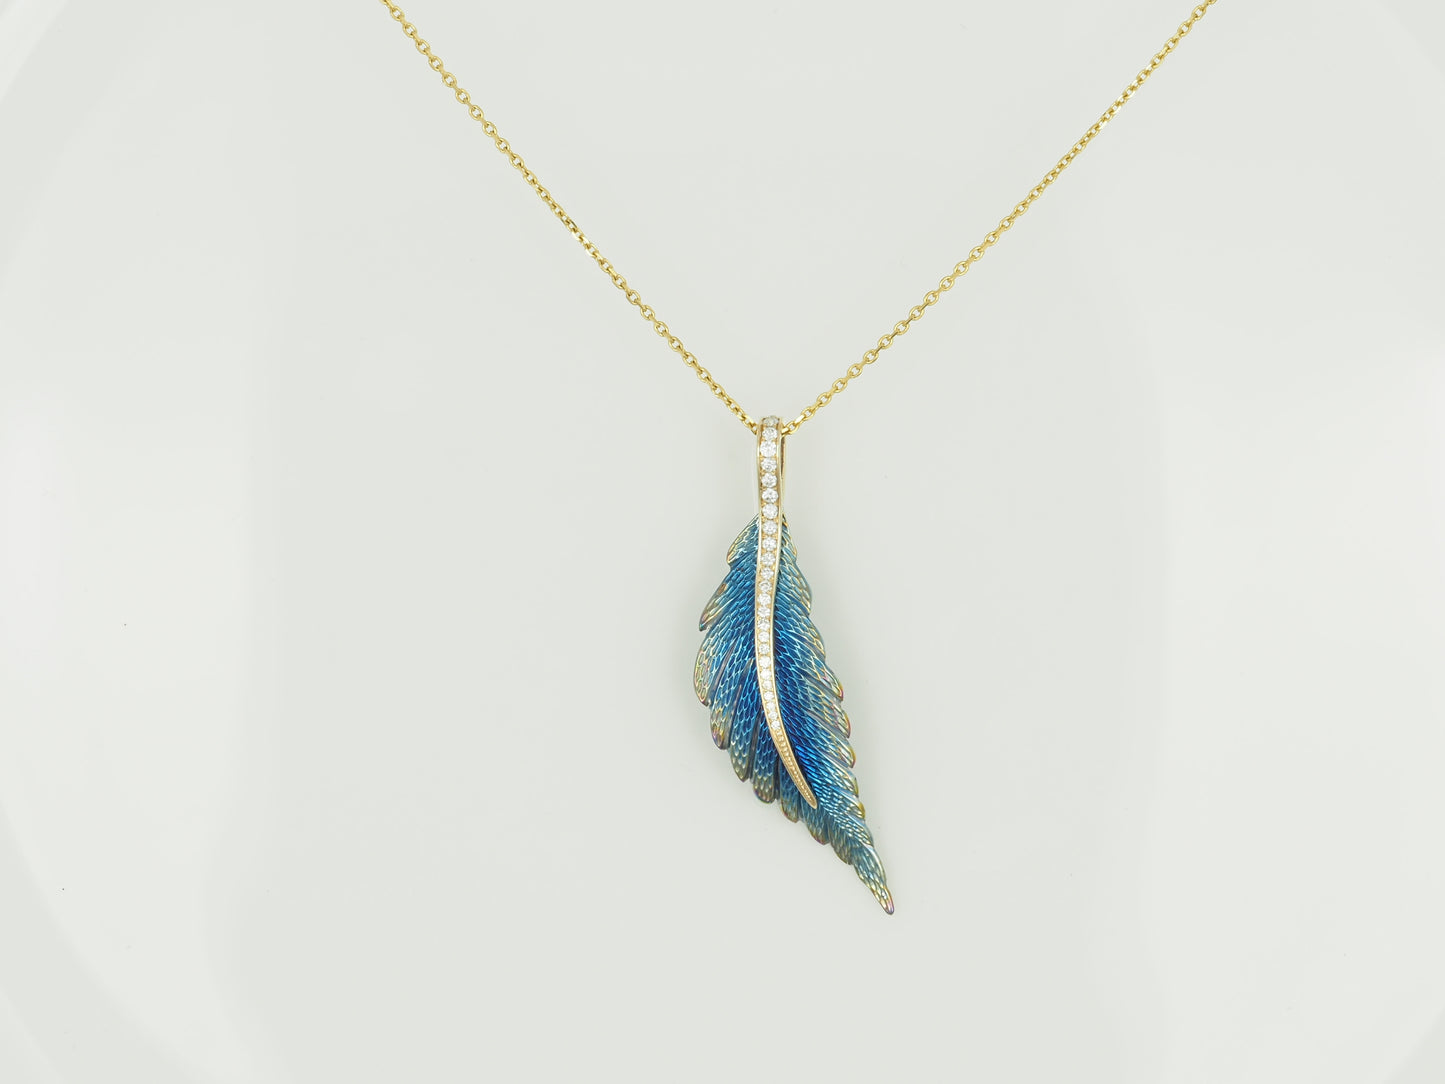 Necklace Feather 14KT Gold & Titanium with Diamonds